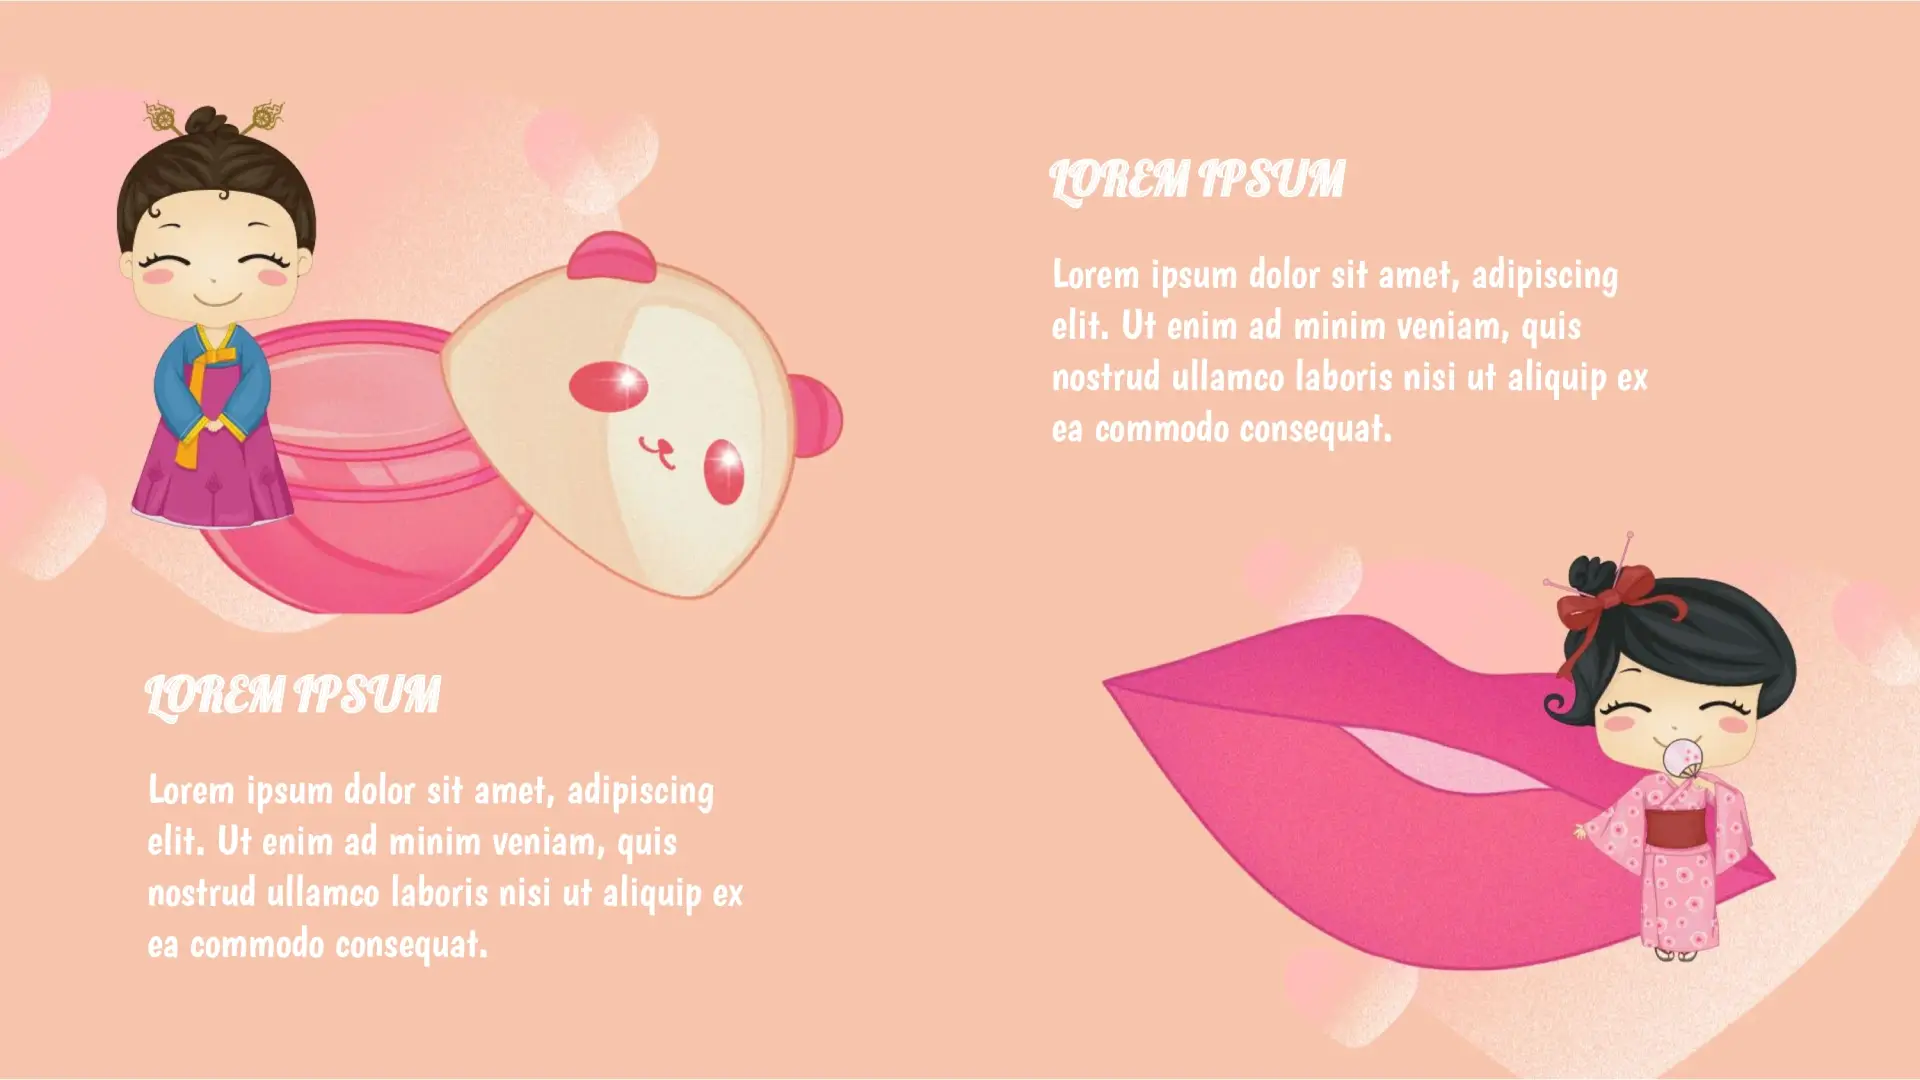 Korean Beauty Product page 2 Template for Google Slides